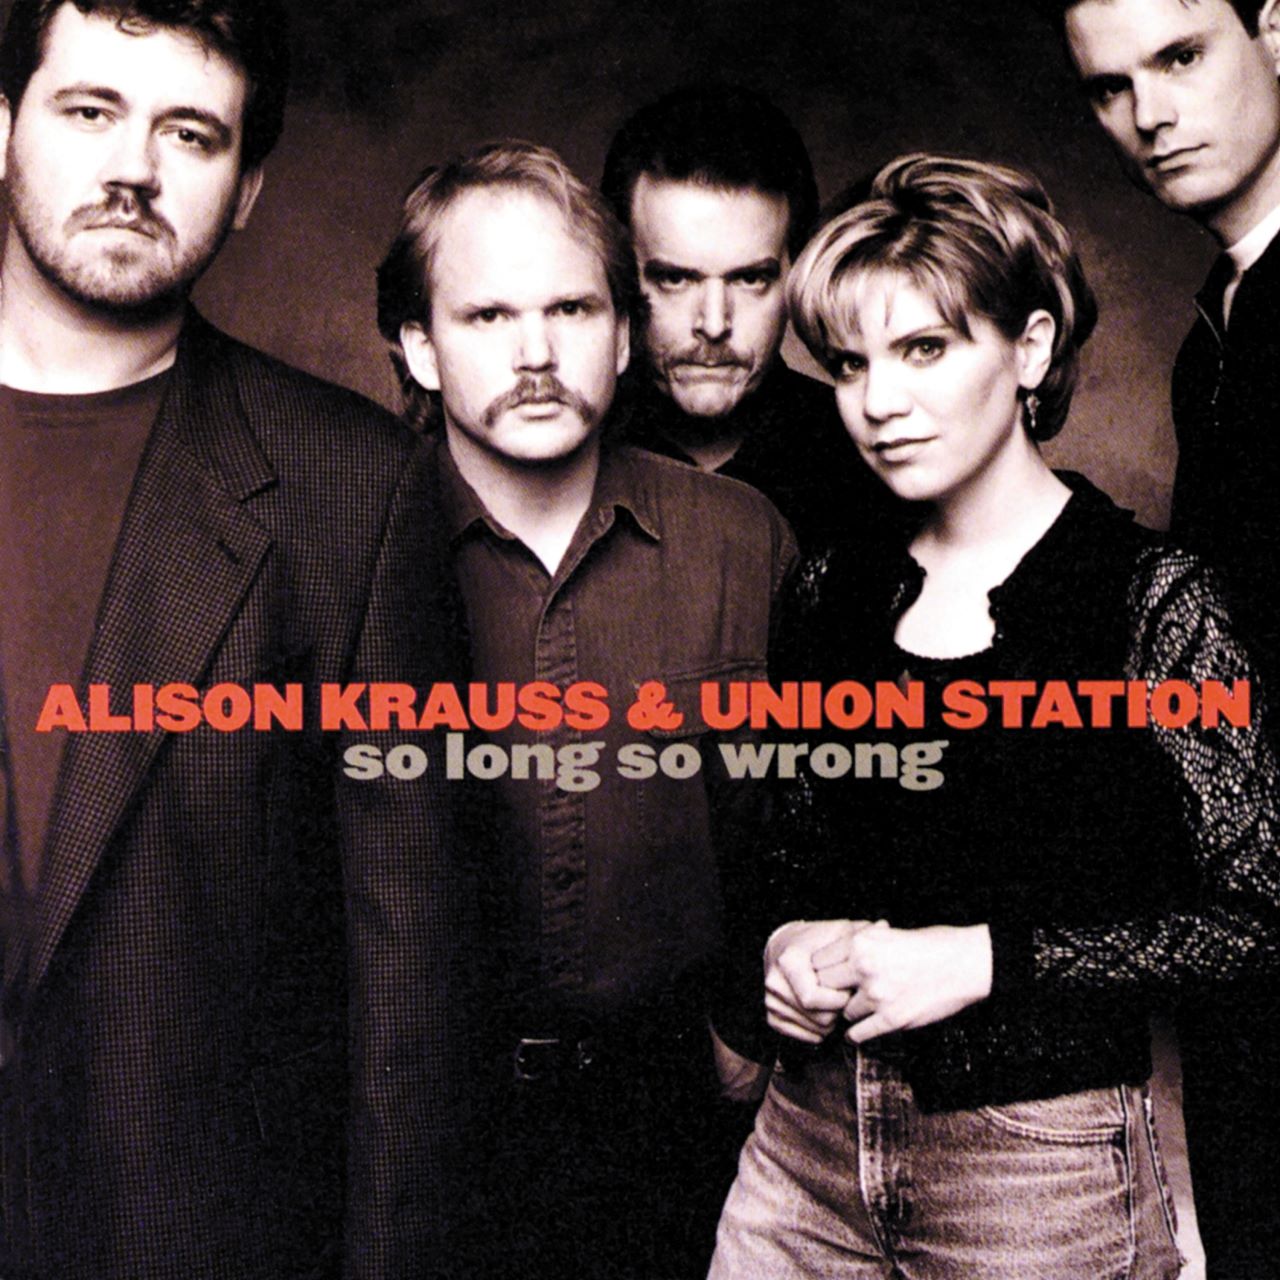 Alison Krauss & Union Station - So Long So Wrong cover album